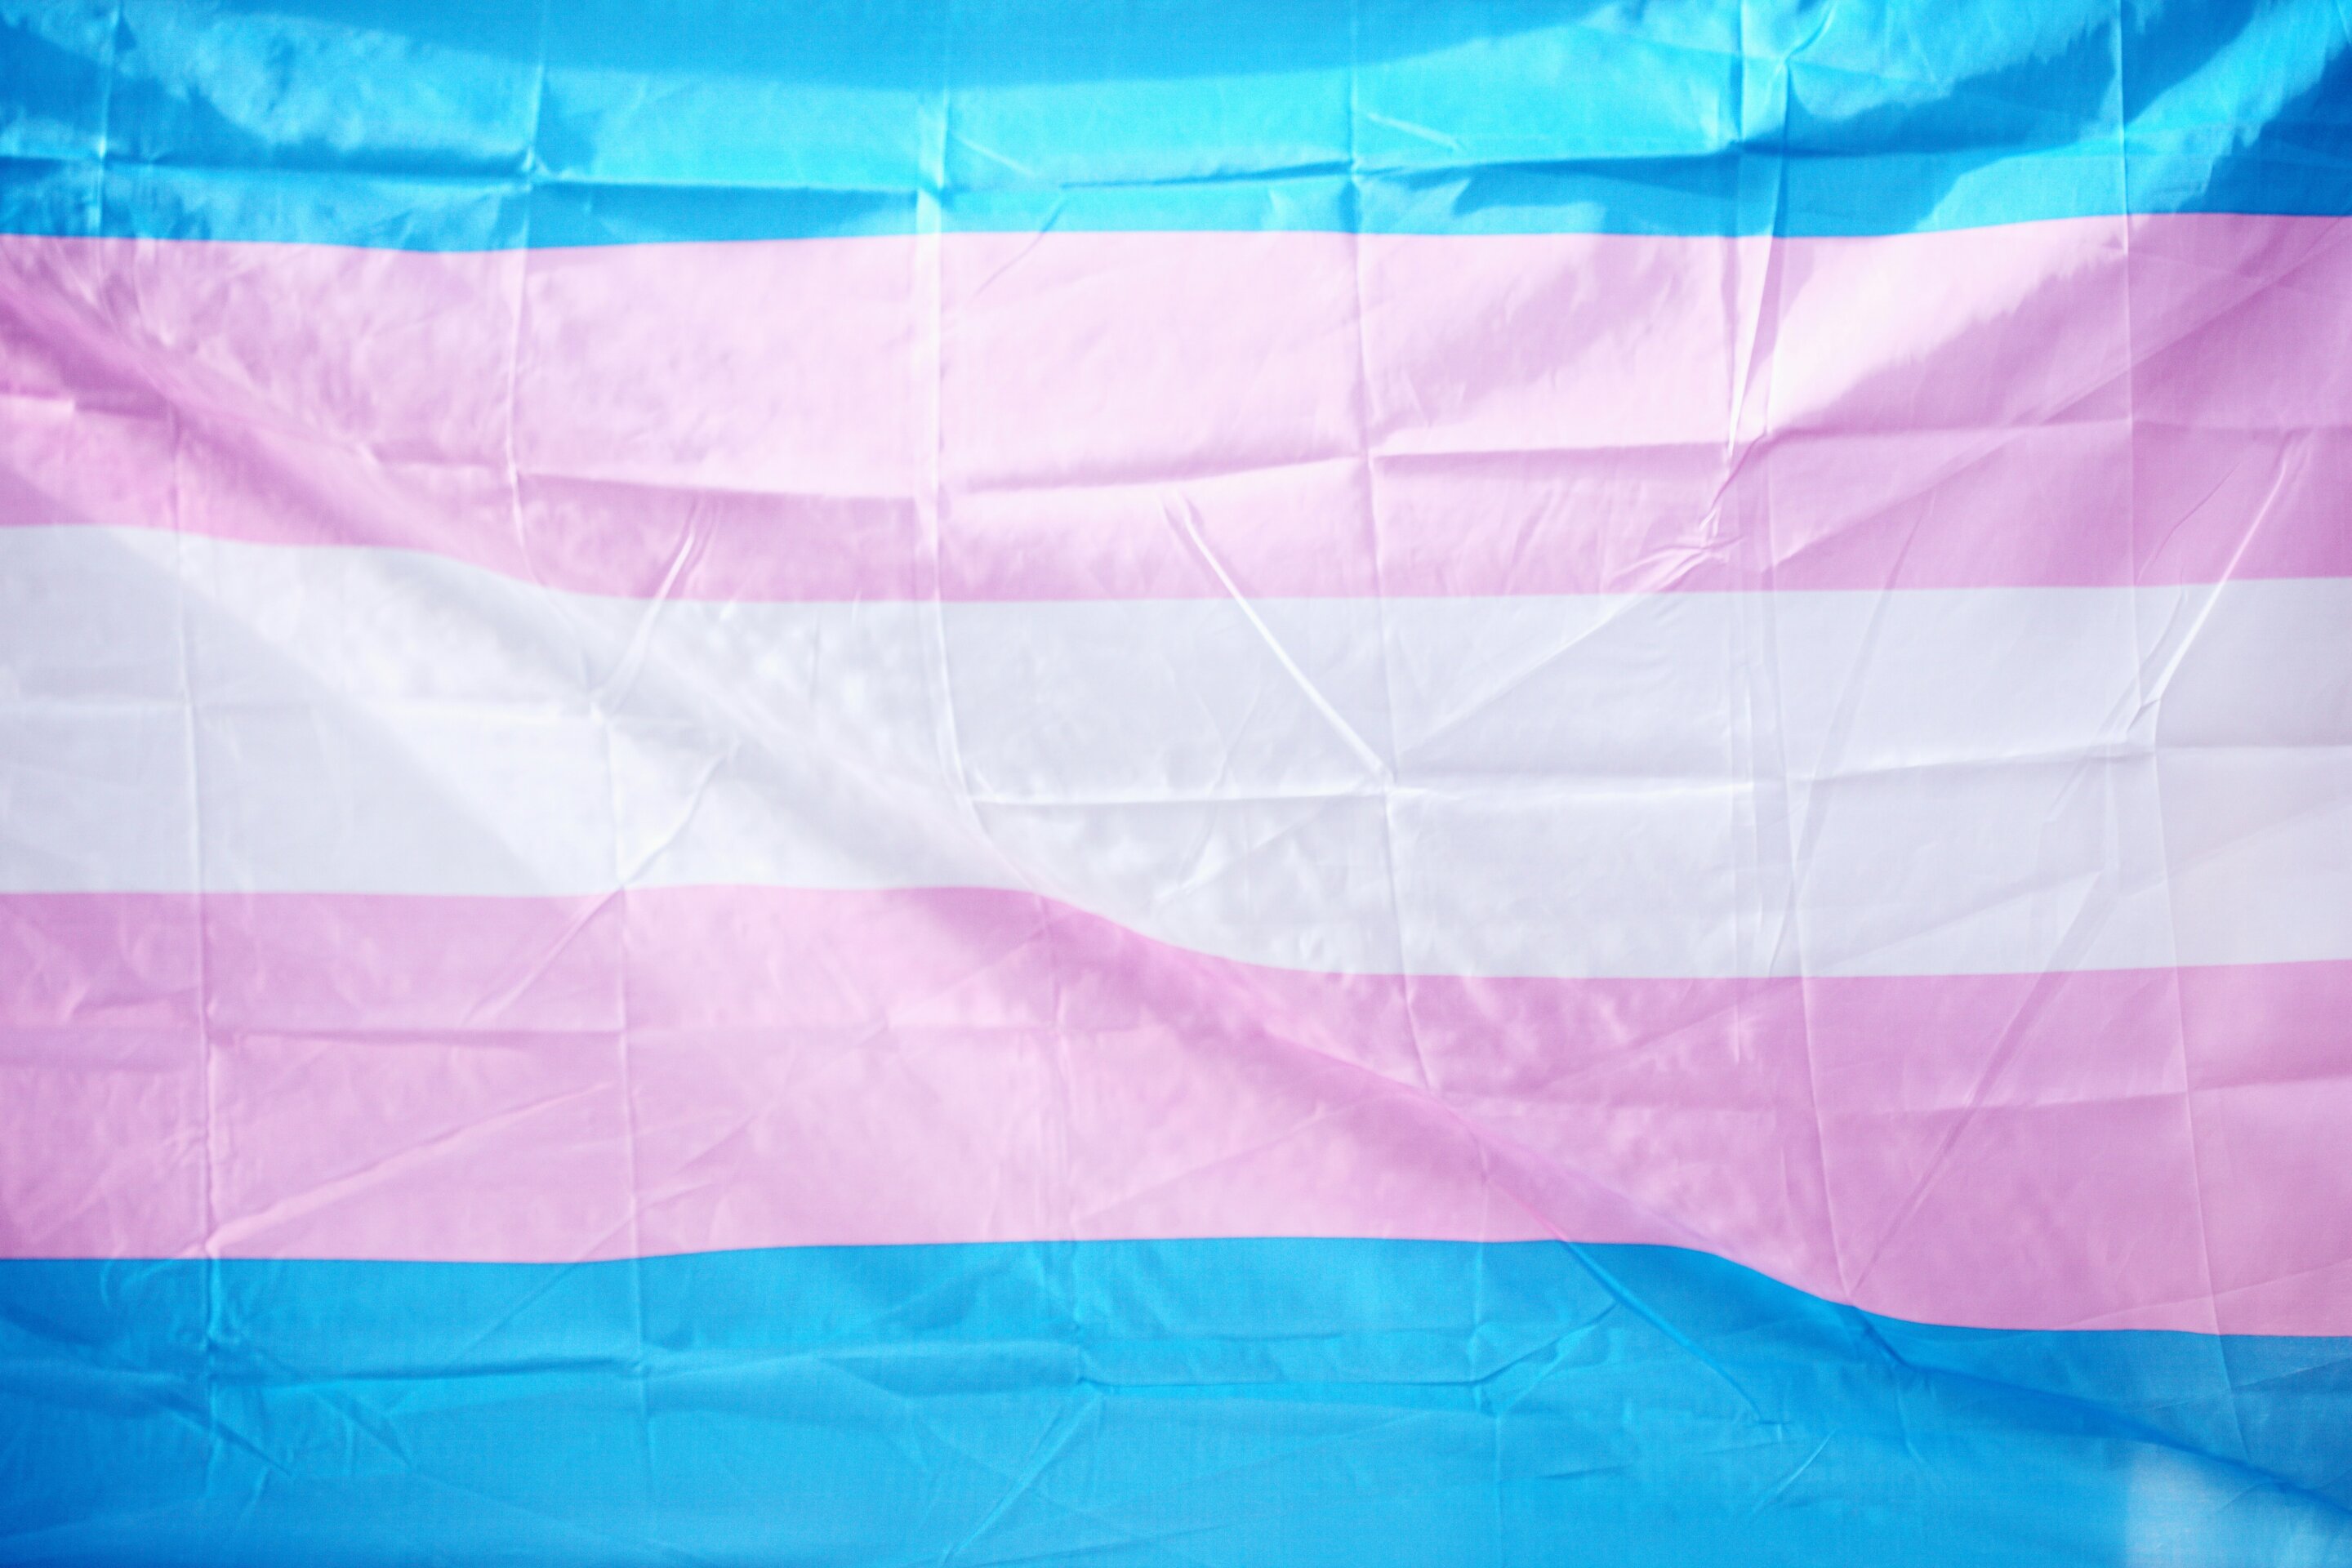 New survey sheds new light on trans life in Maryland